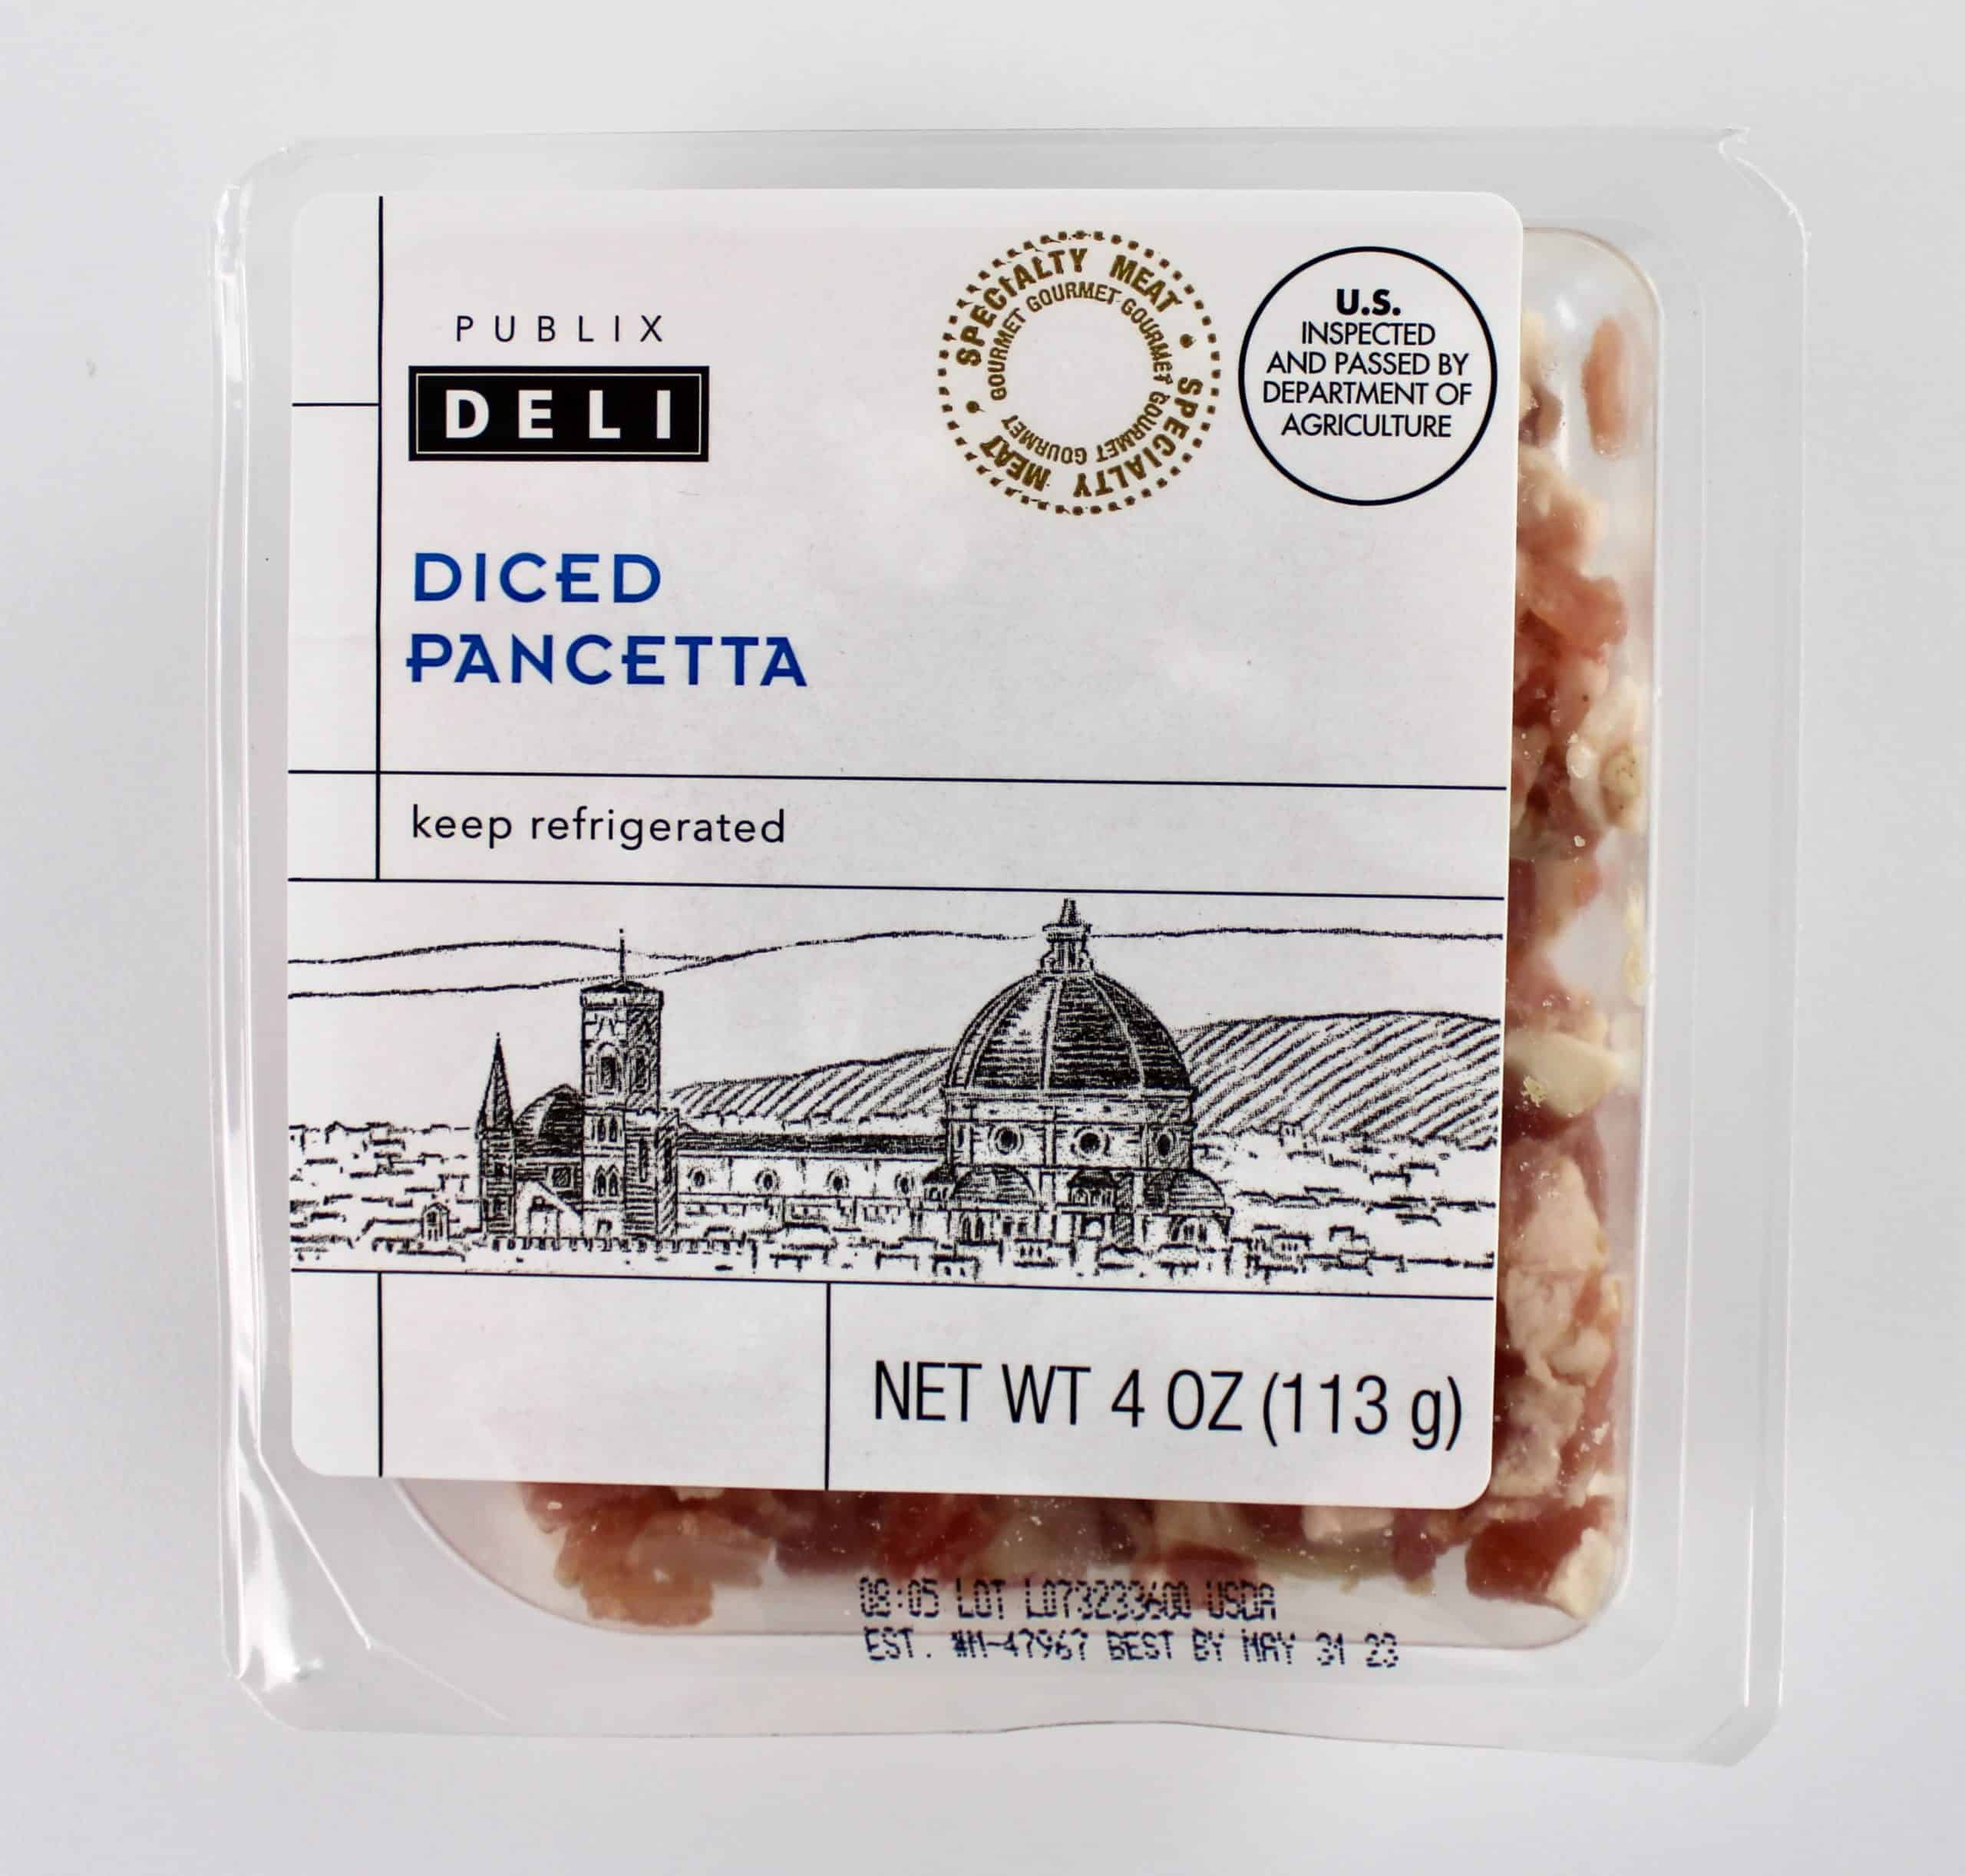 pancetta in package from Publix